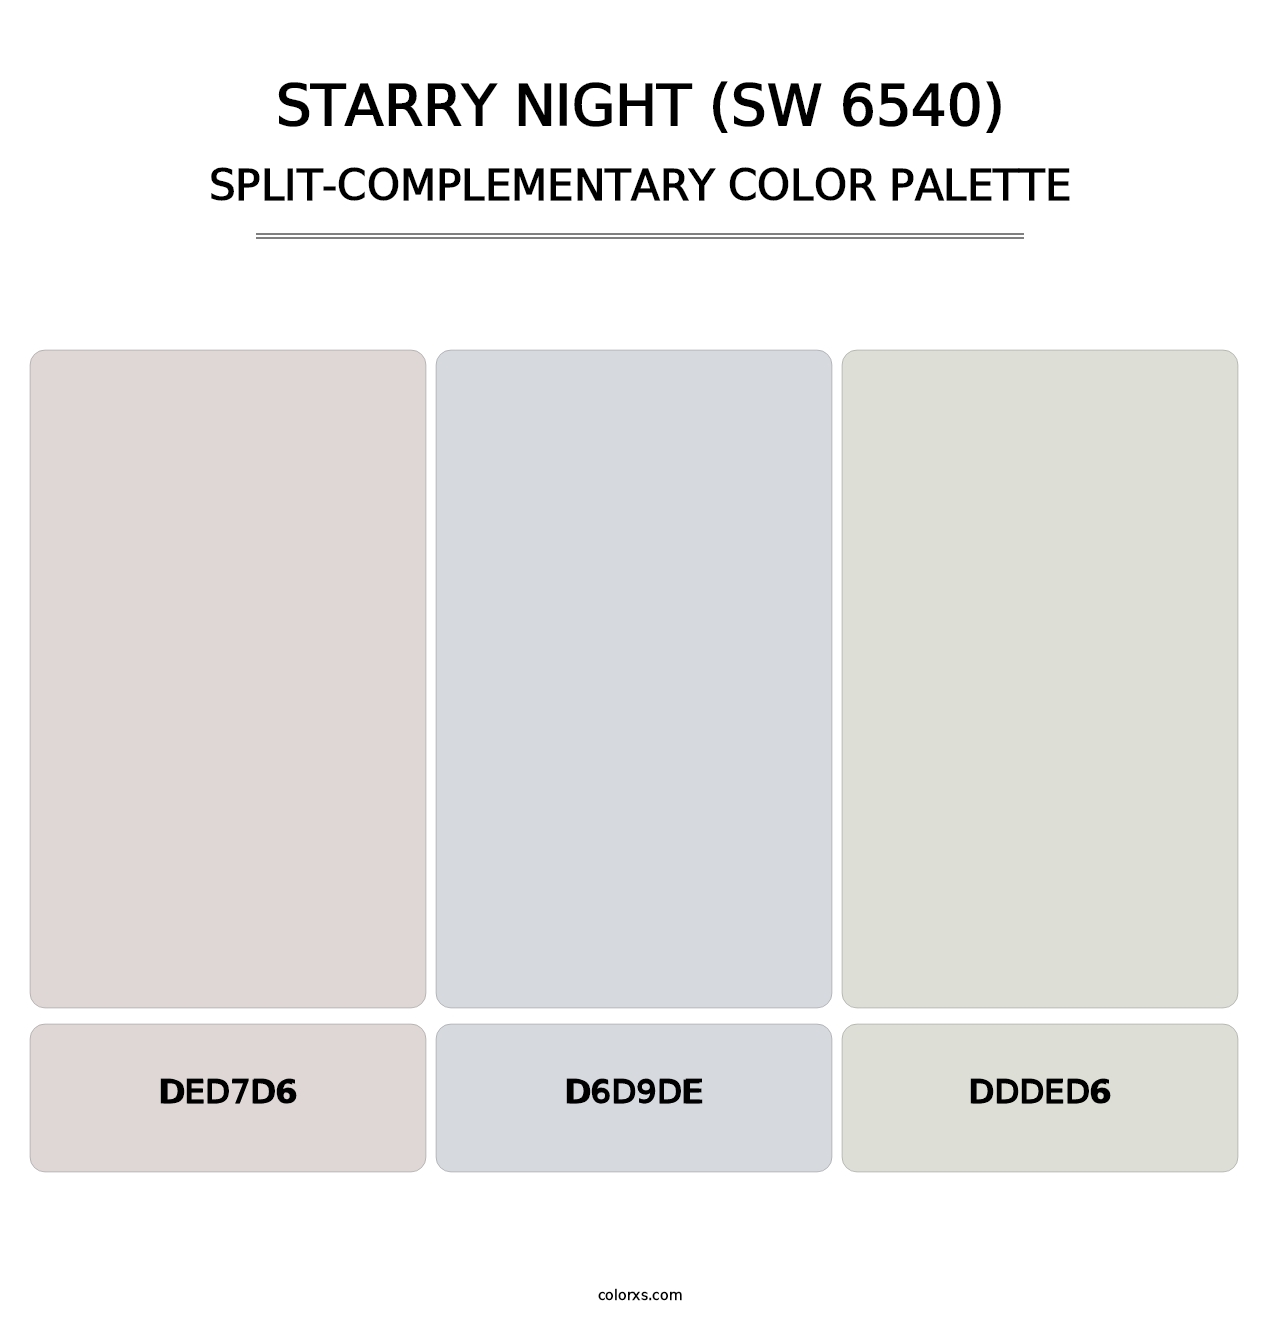 Starry Night (SW 6540) - Split-Complementary Color Palette